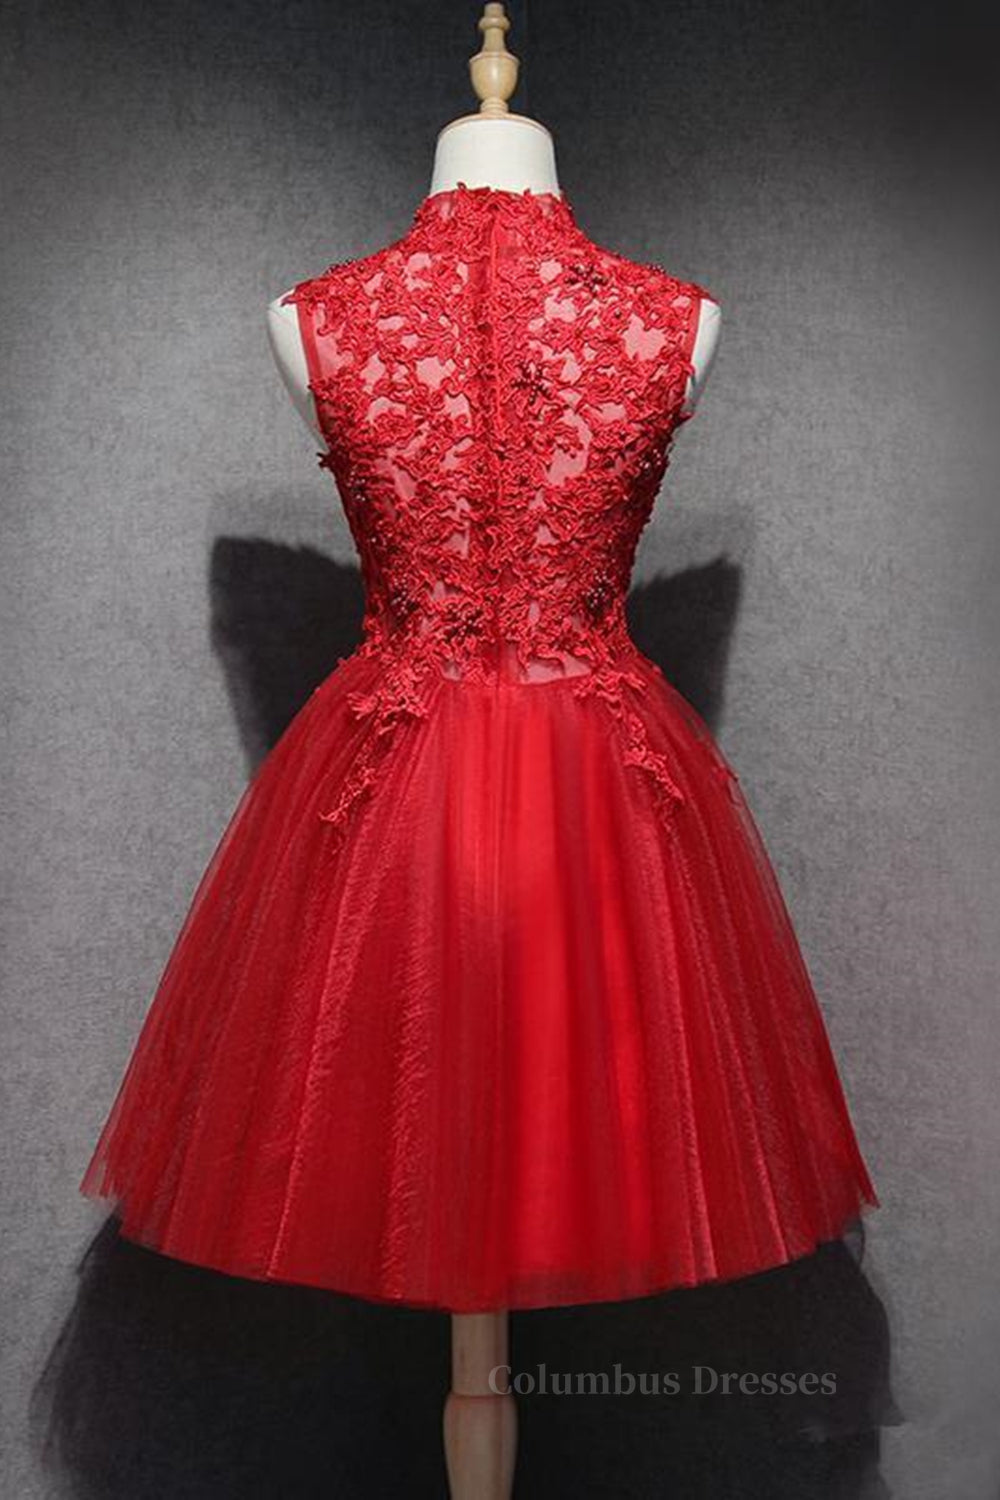 Party Dress Red Colour, High Neck Red Lace Short Prom Dress, Red Lace Homecoming Dress, Red Formal Graduation Evening Dress